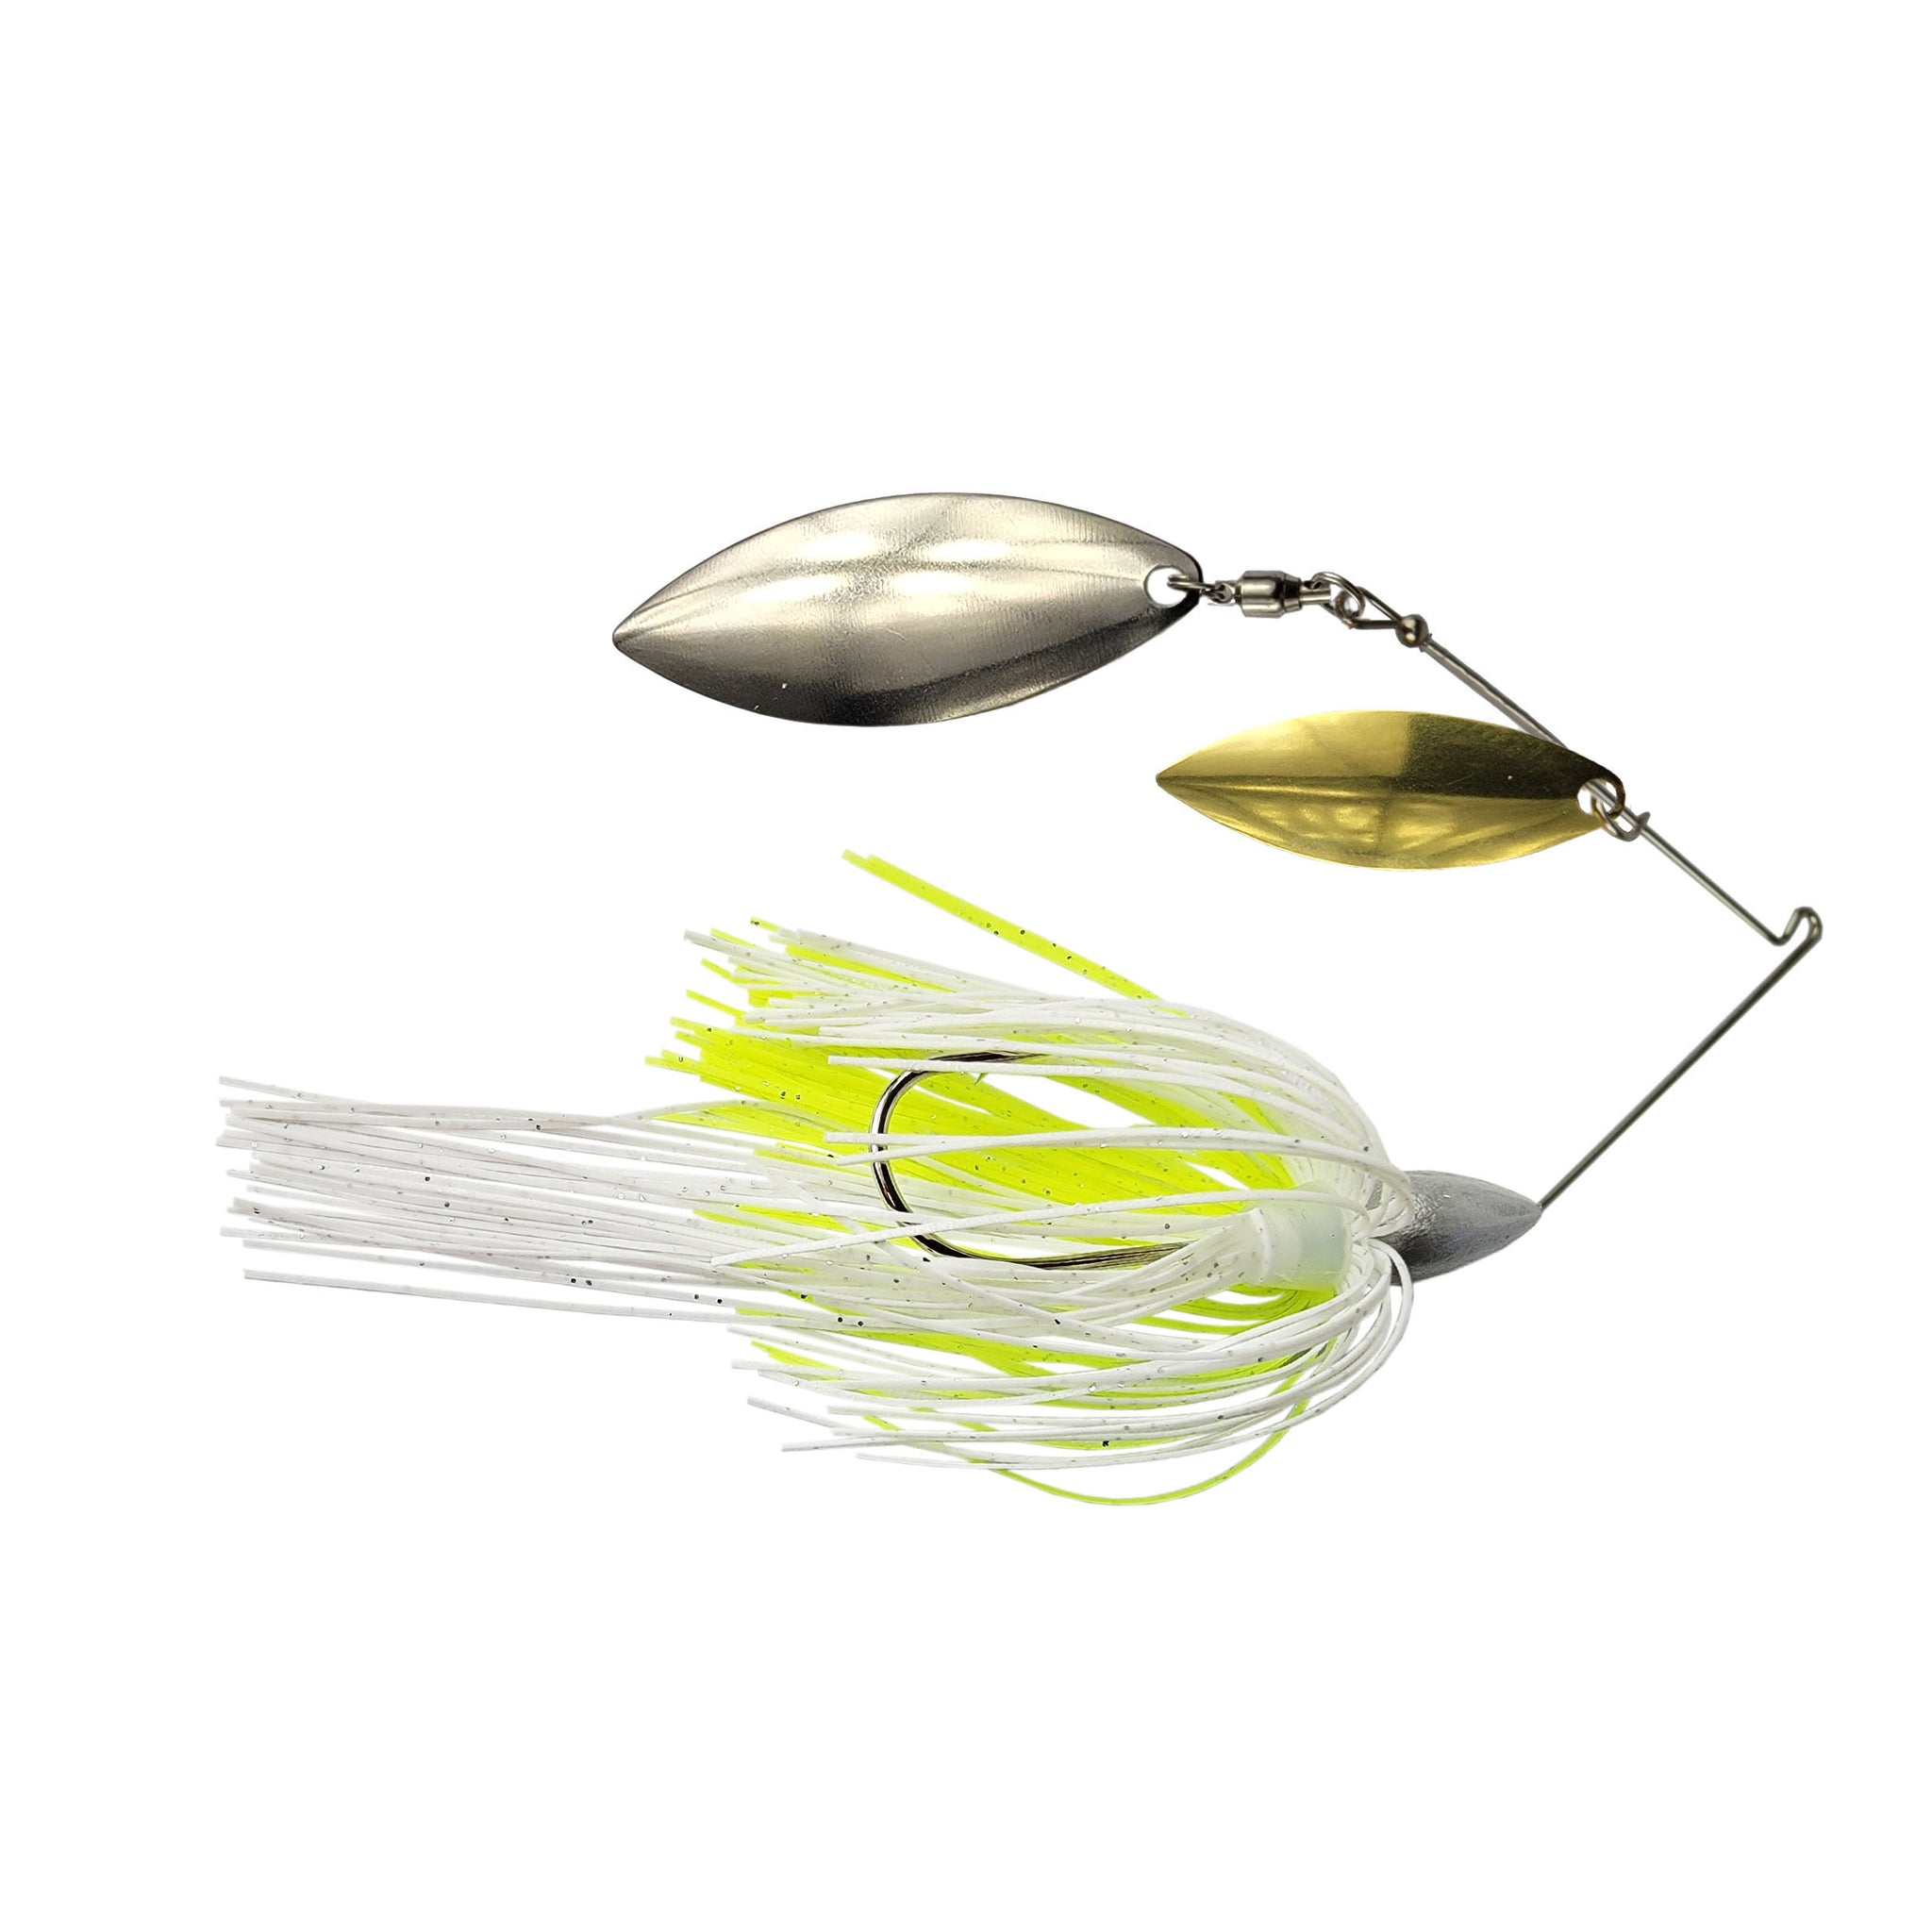 Tackle HD CS-II-DW Spinnerbait 3/4-Ounce - Chartreuse White